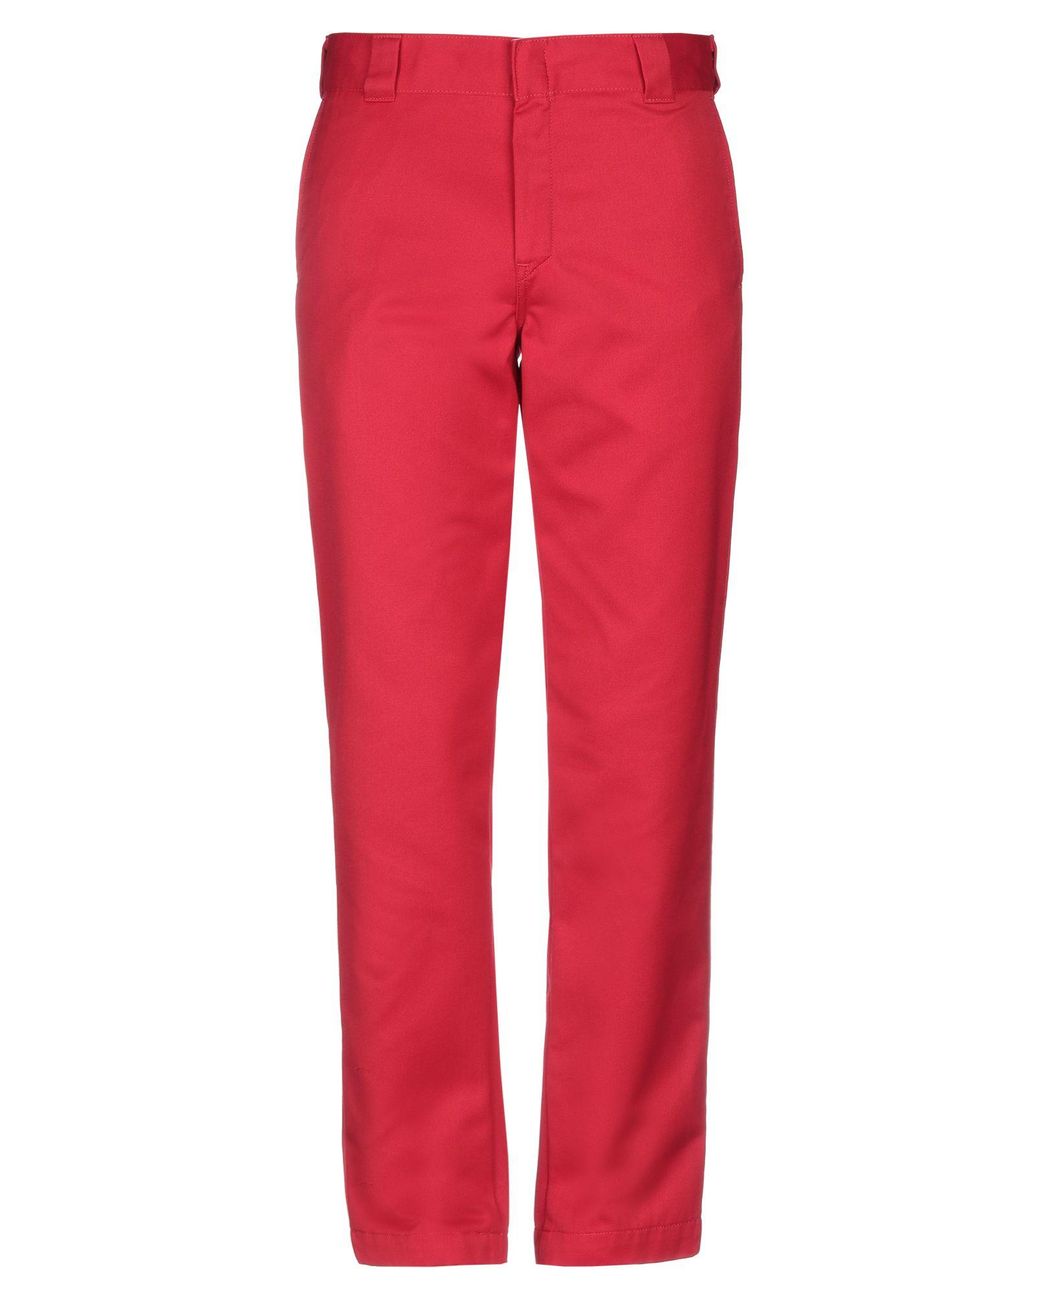 Carhartt Synthetic Casual Pants in Red for Men - Lyst